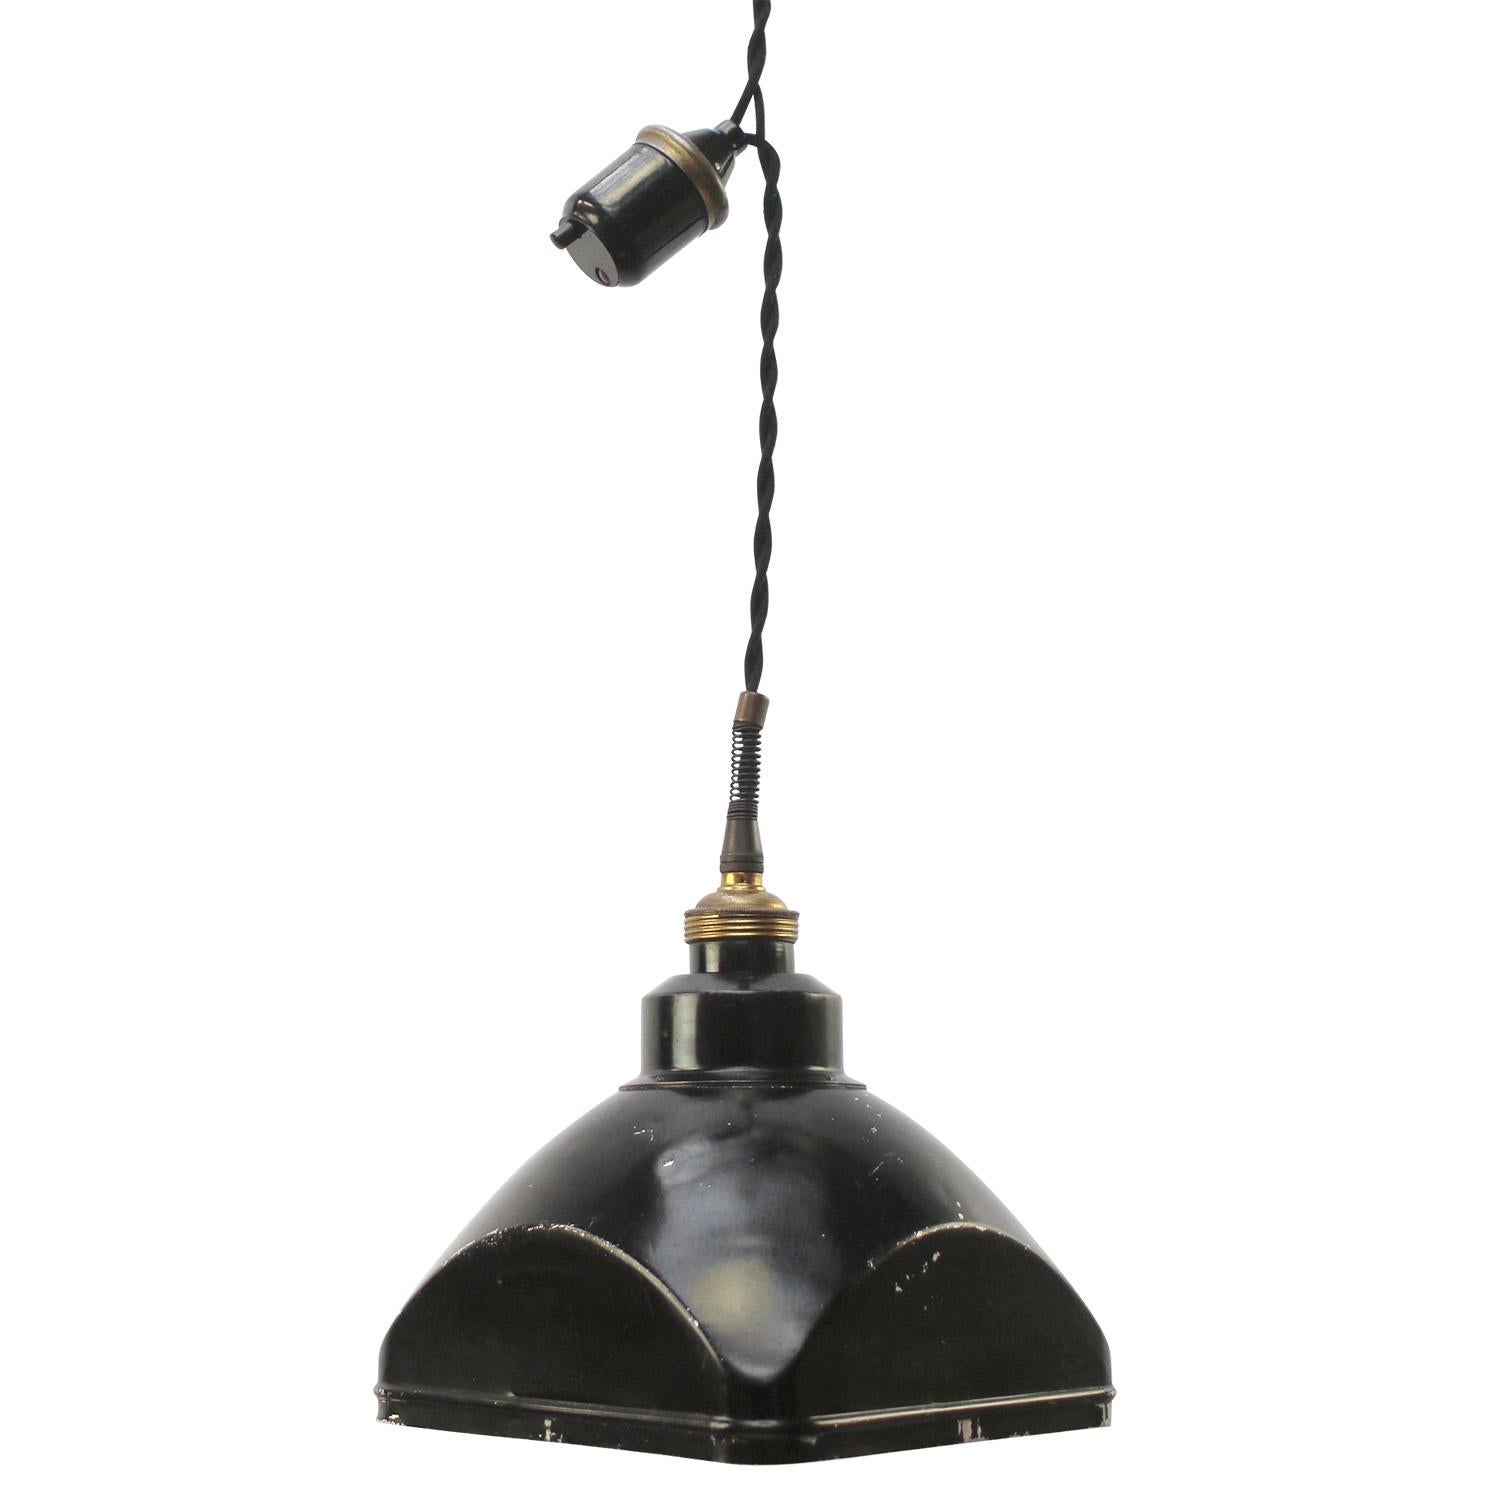 Vintage American photo studio darkroom light.
Aluminum and brass, with original Bakelite switch

Weight: 0.60 kg / 1.3 lb

Priced per individual item. All lamps have been made suitable by international standards for incandescent light bulbs,